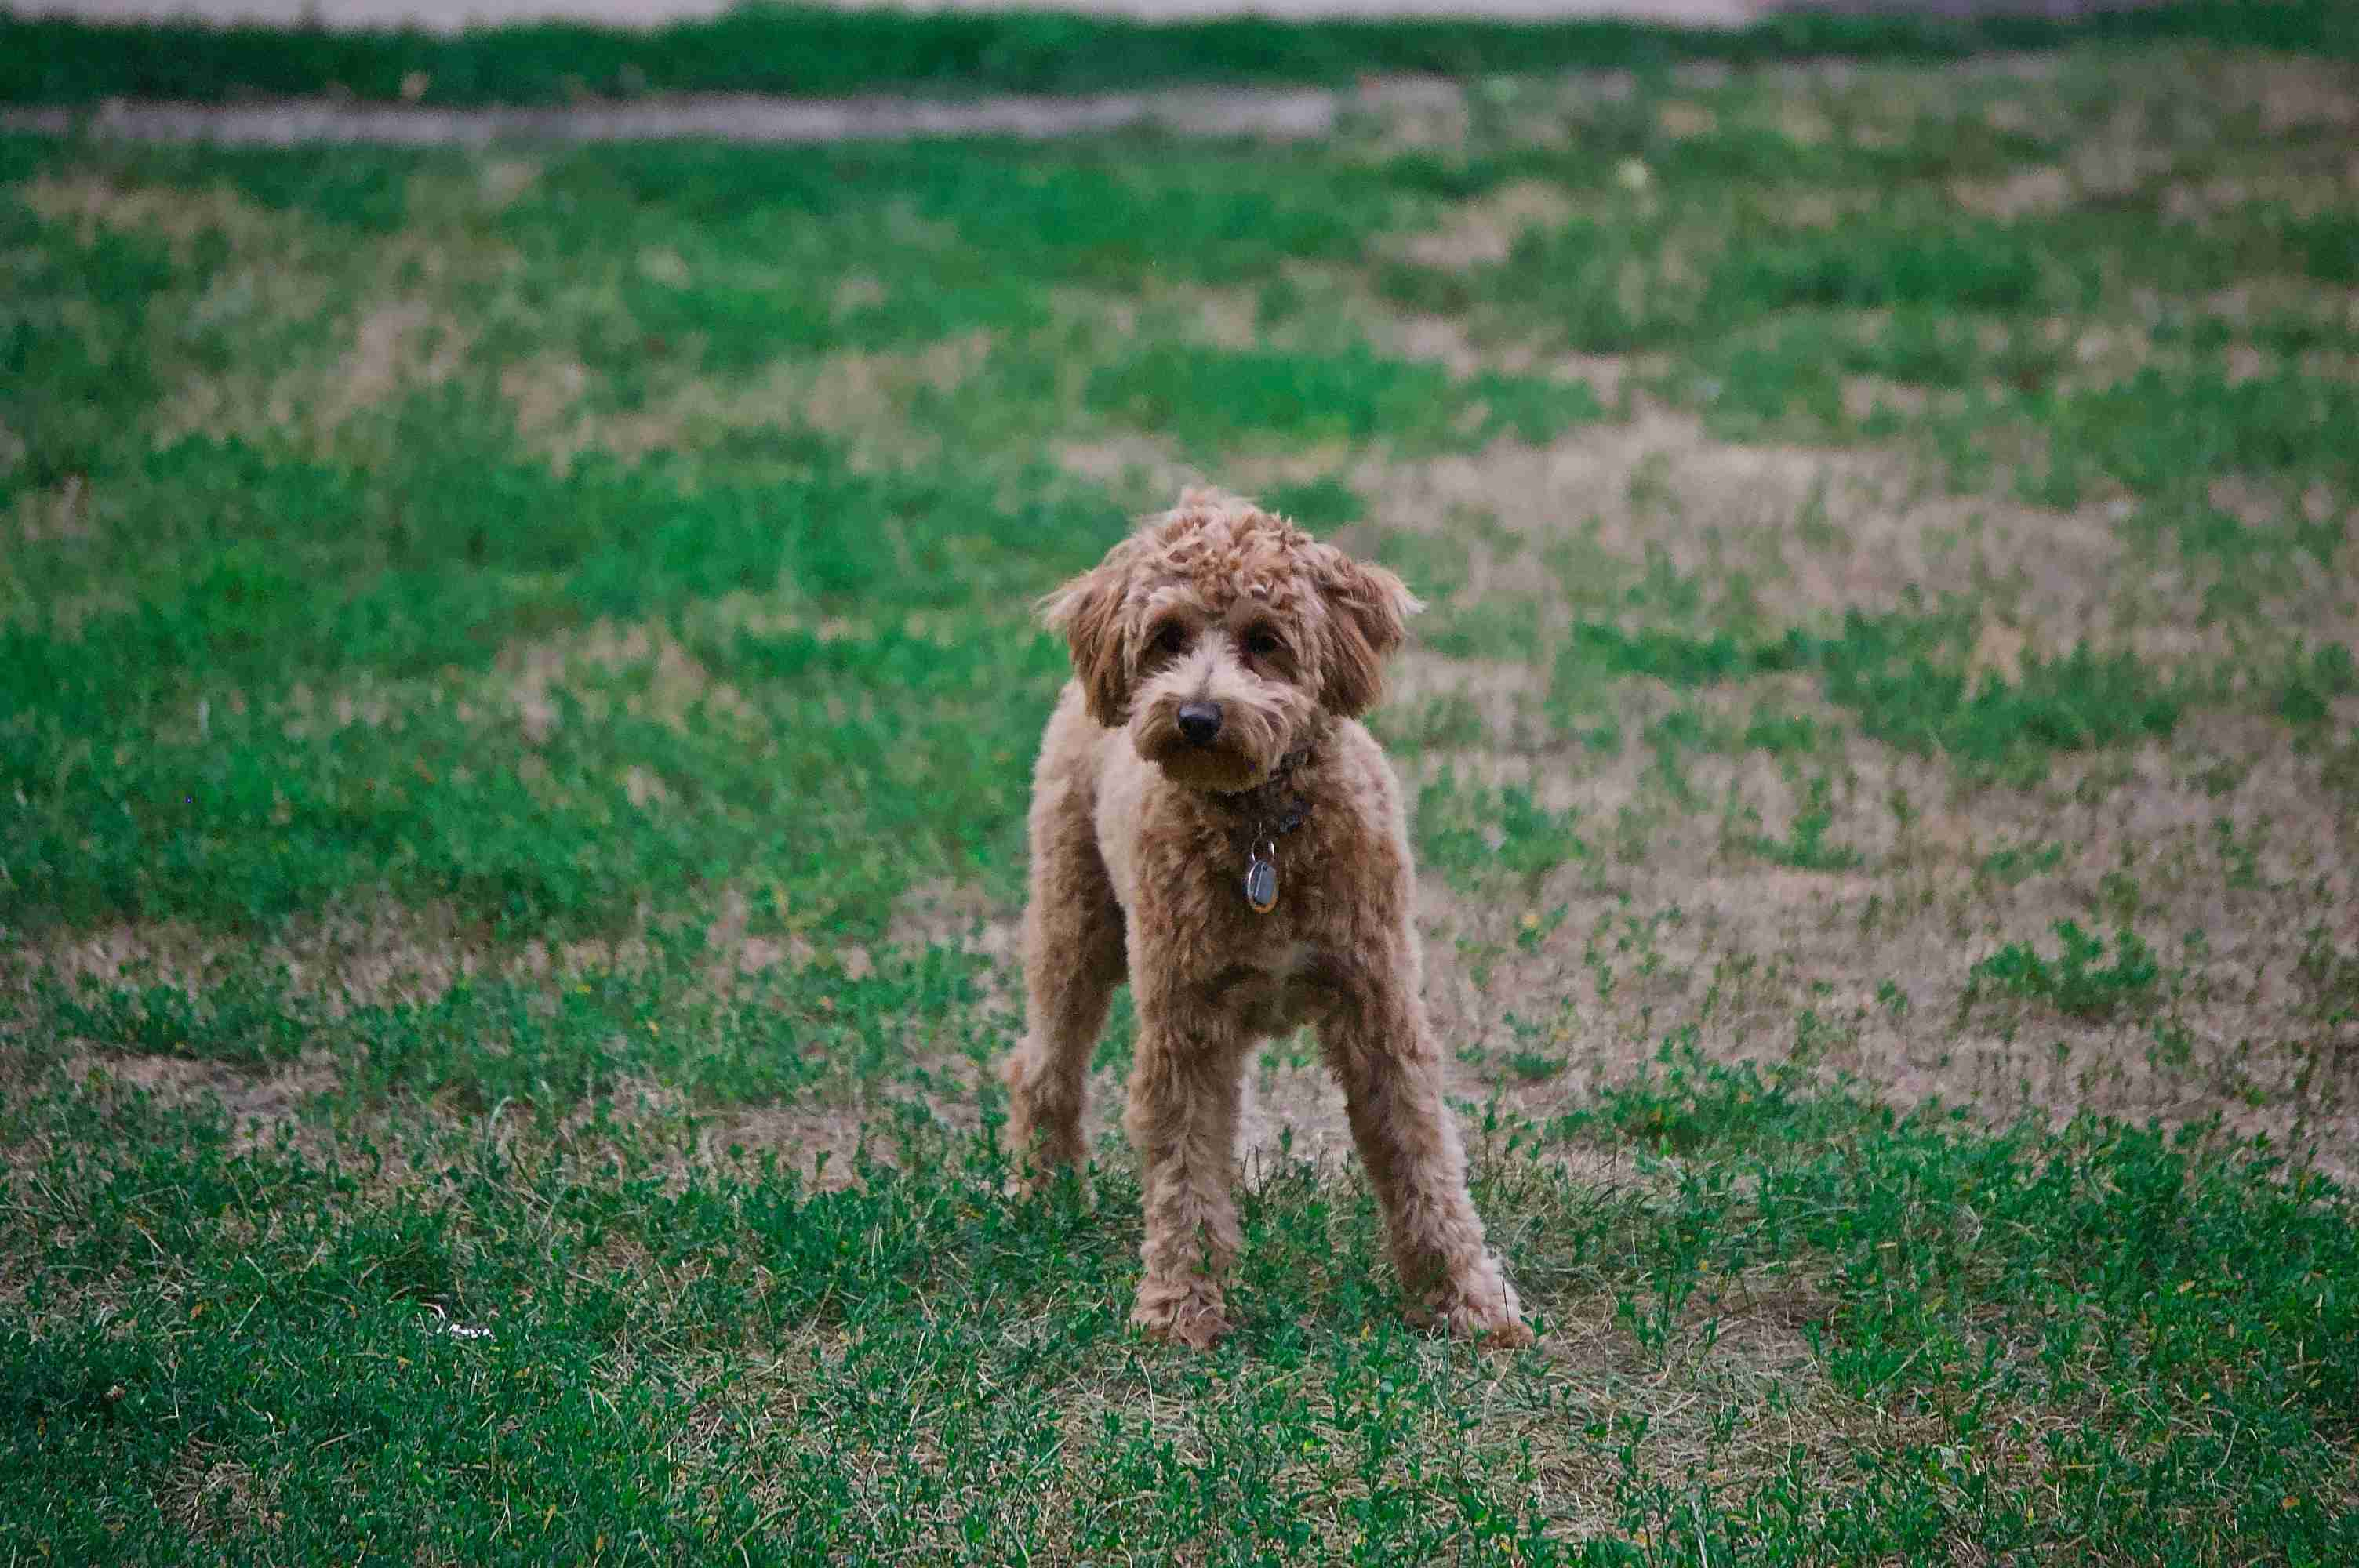 Are Poodles at risk of developing chronic kidney disease? What treatment options are available?